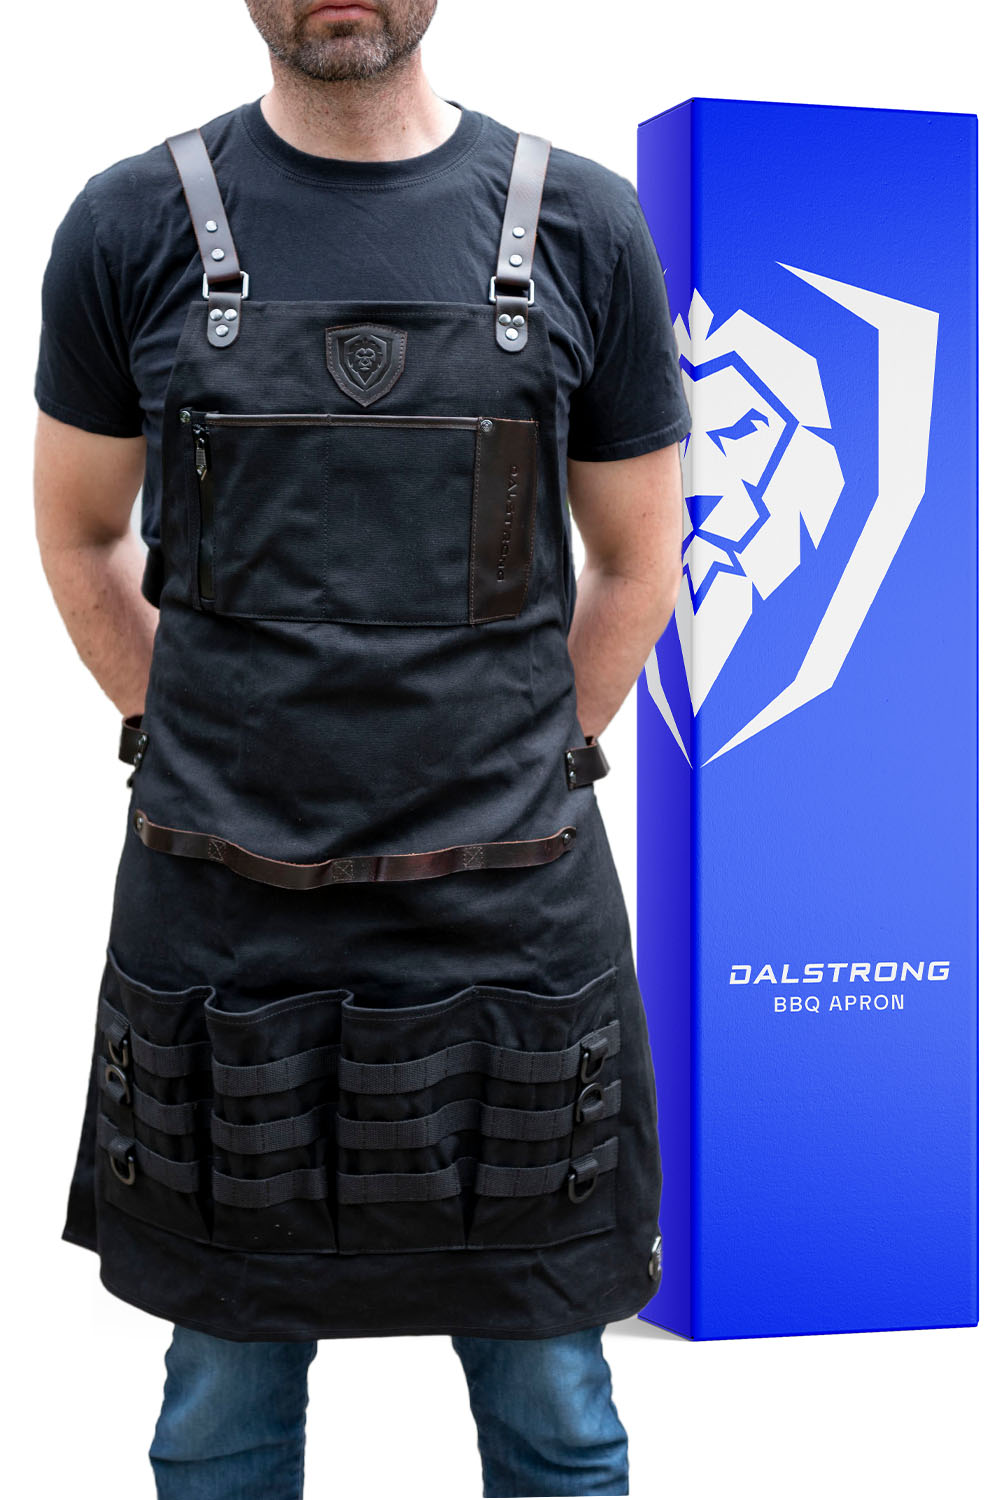 BBQ Apron |  Heavy-Duty Waxed Canvas | Professional Chef's Kitchen Apron | Dalstrong ©